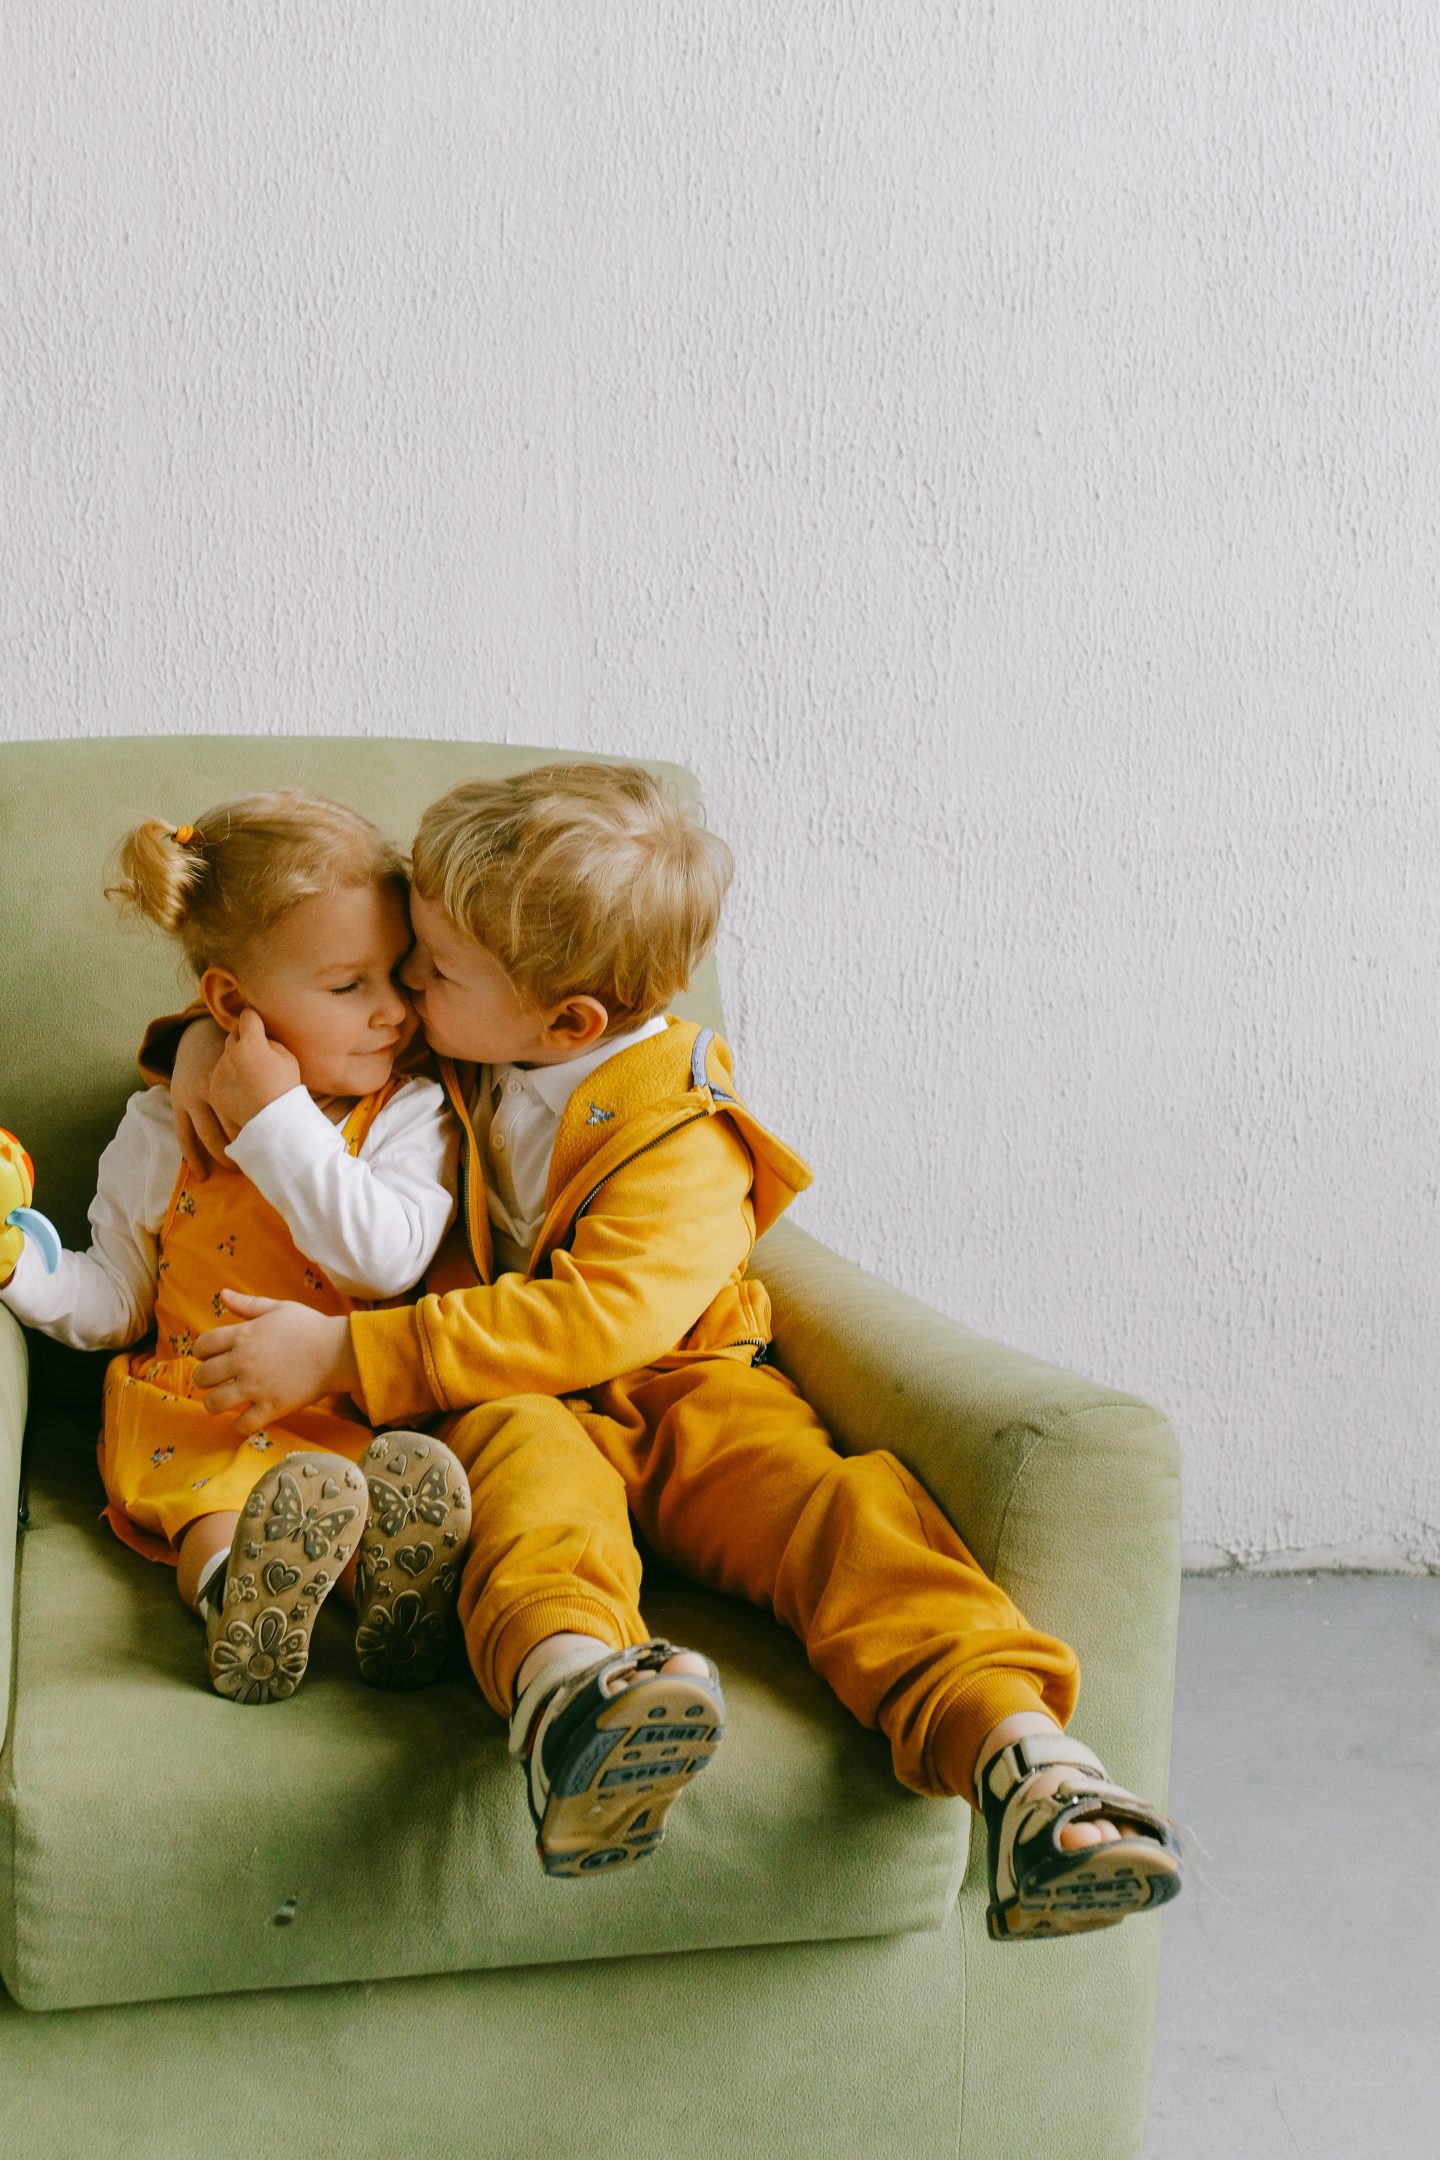 A Guide To Helping Your Kids Cultivate Thoughtfulness and Empathy